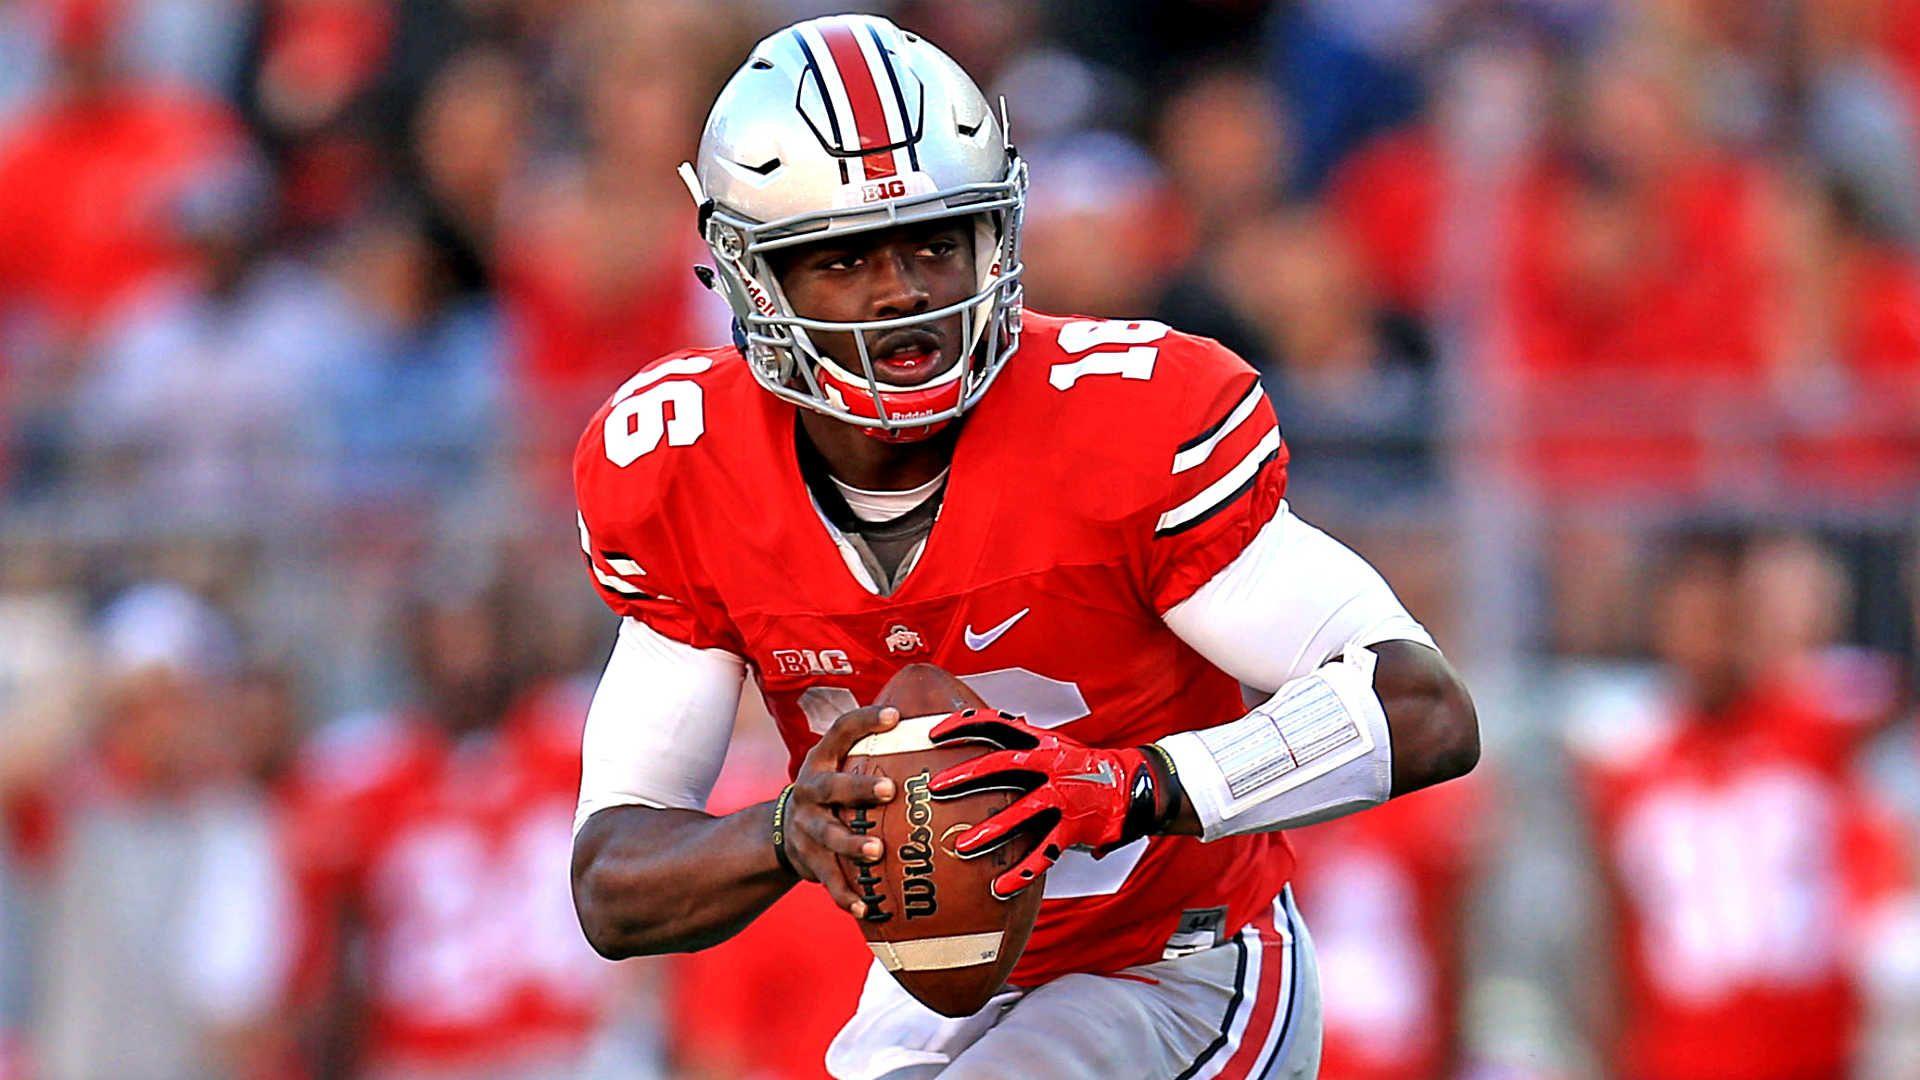 Ohio State's J.T. Barrett Presents USC With Another Dual Threat QB